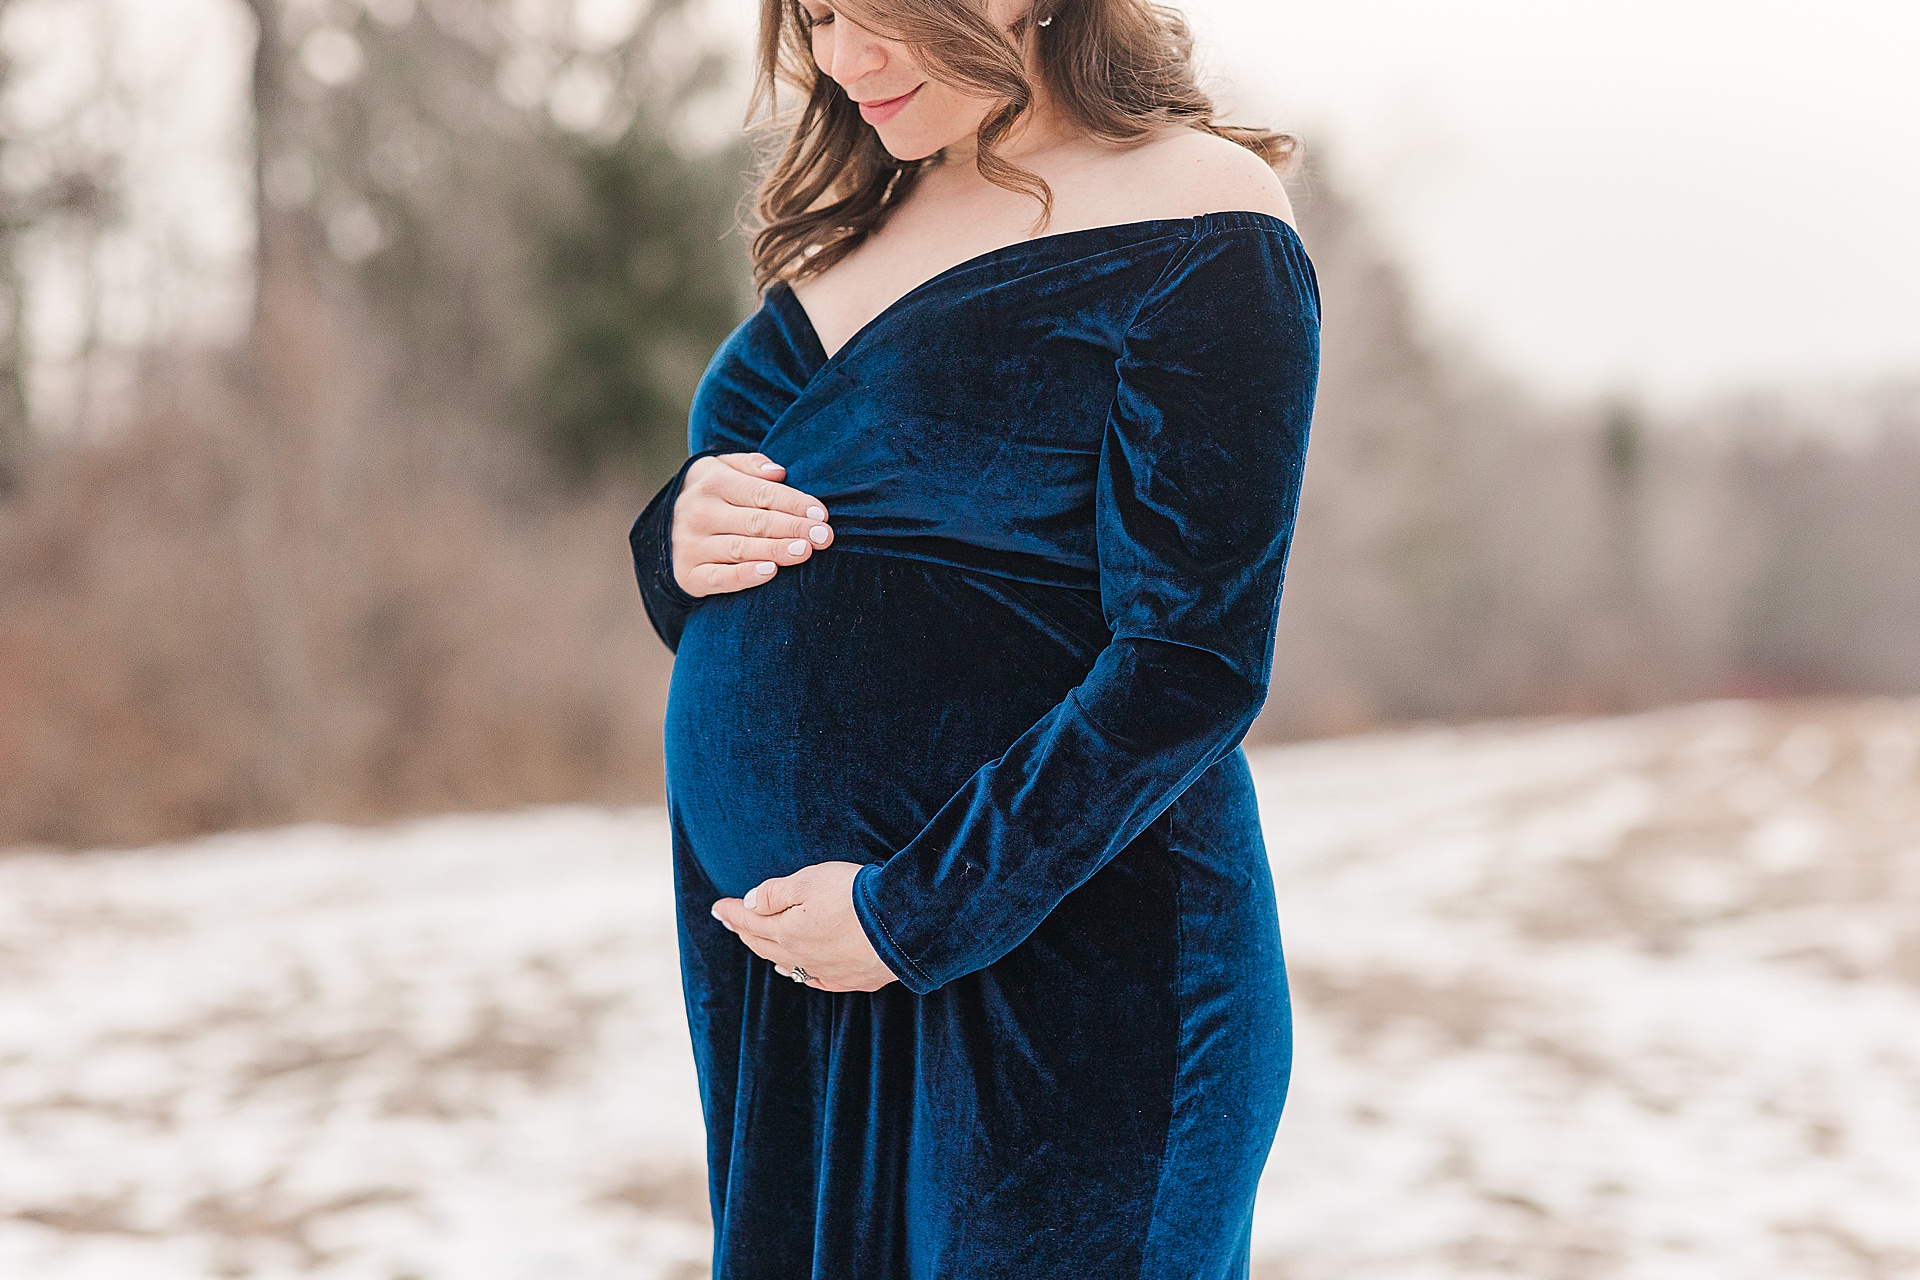 Winter maternity session with Sara Sniderman Photography at Cow Common, Wayland Massachusetts